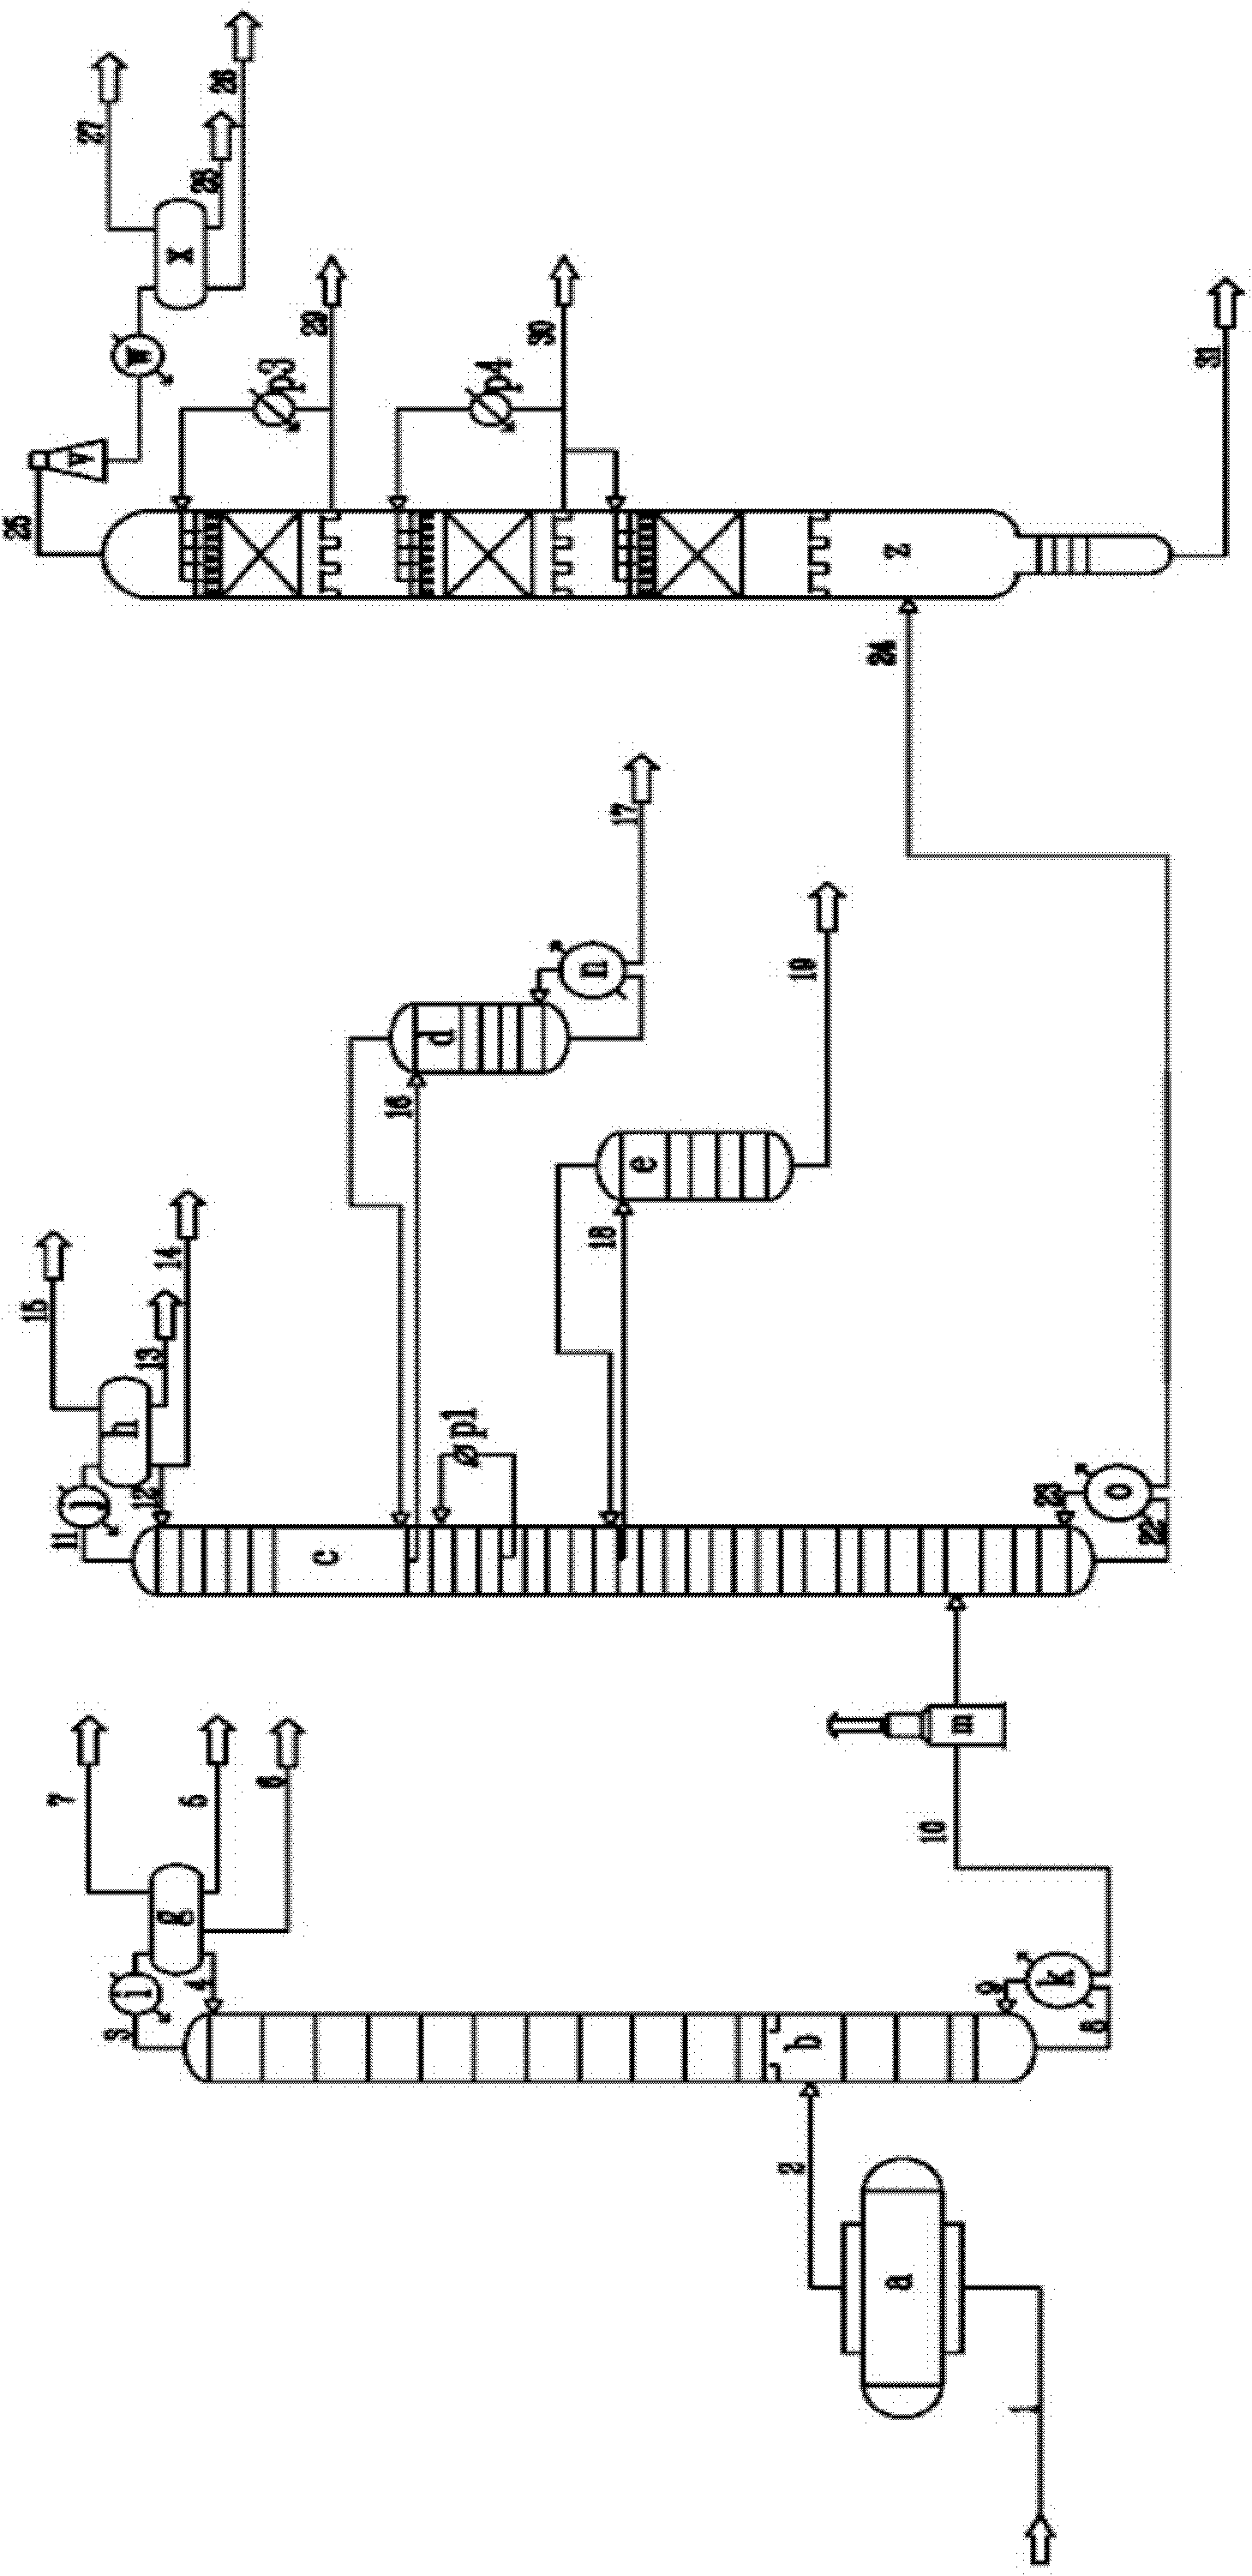 System and method for processing condensate oil